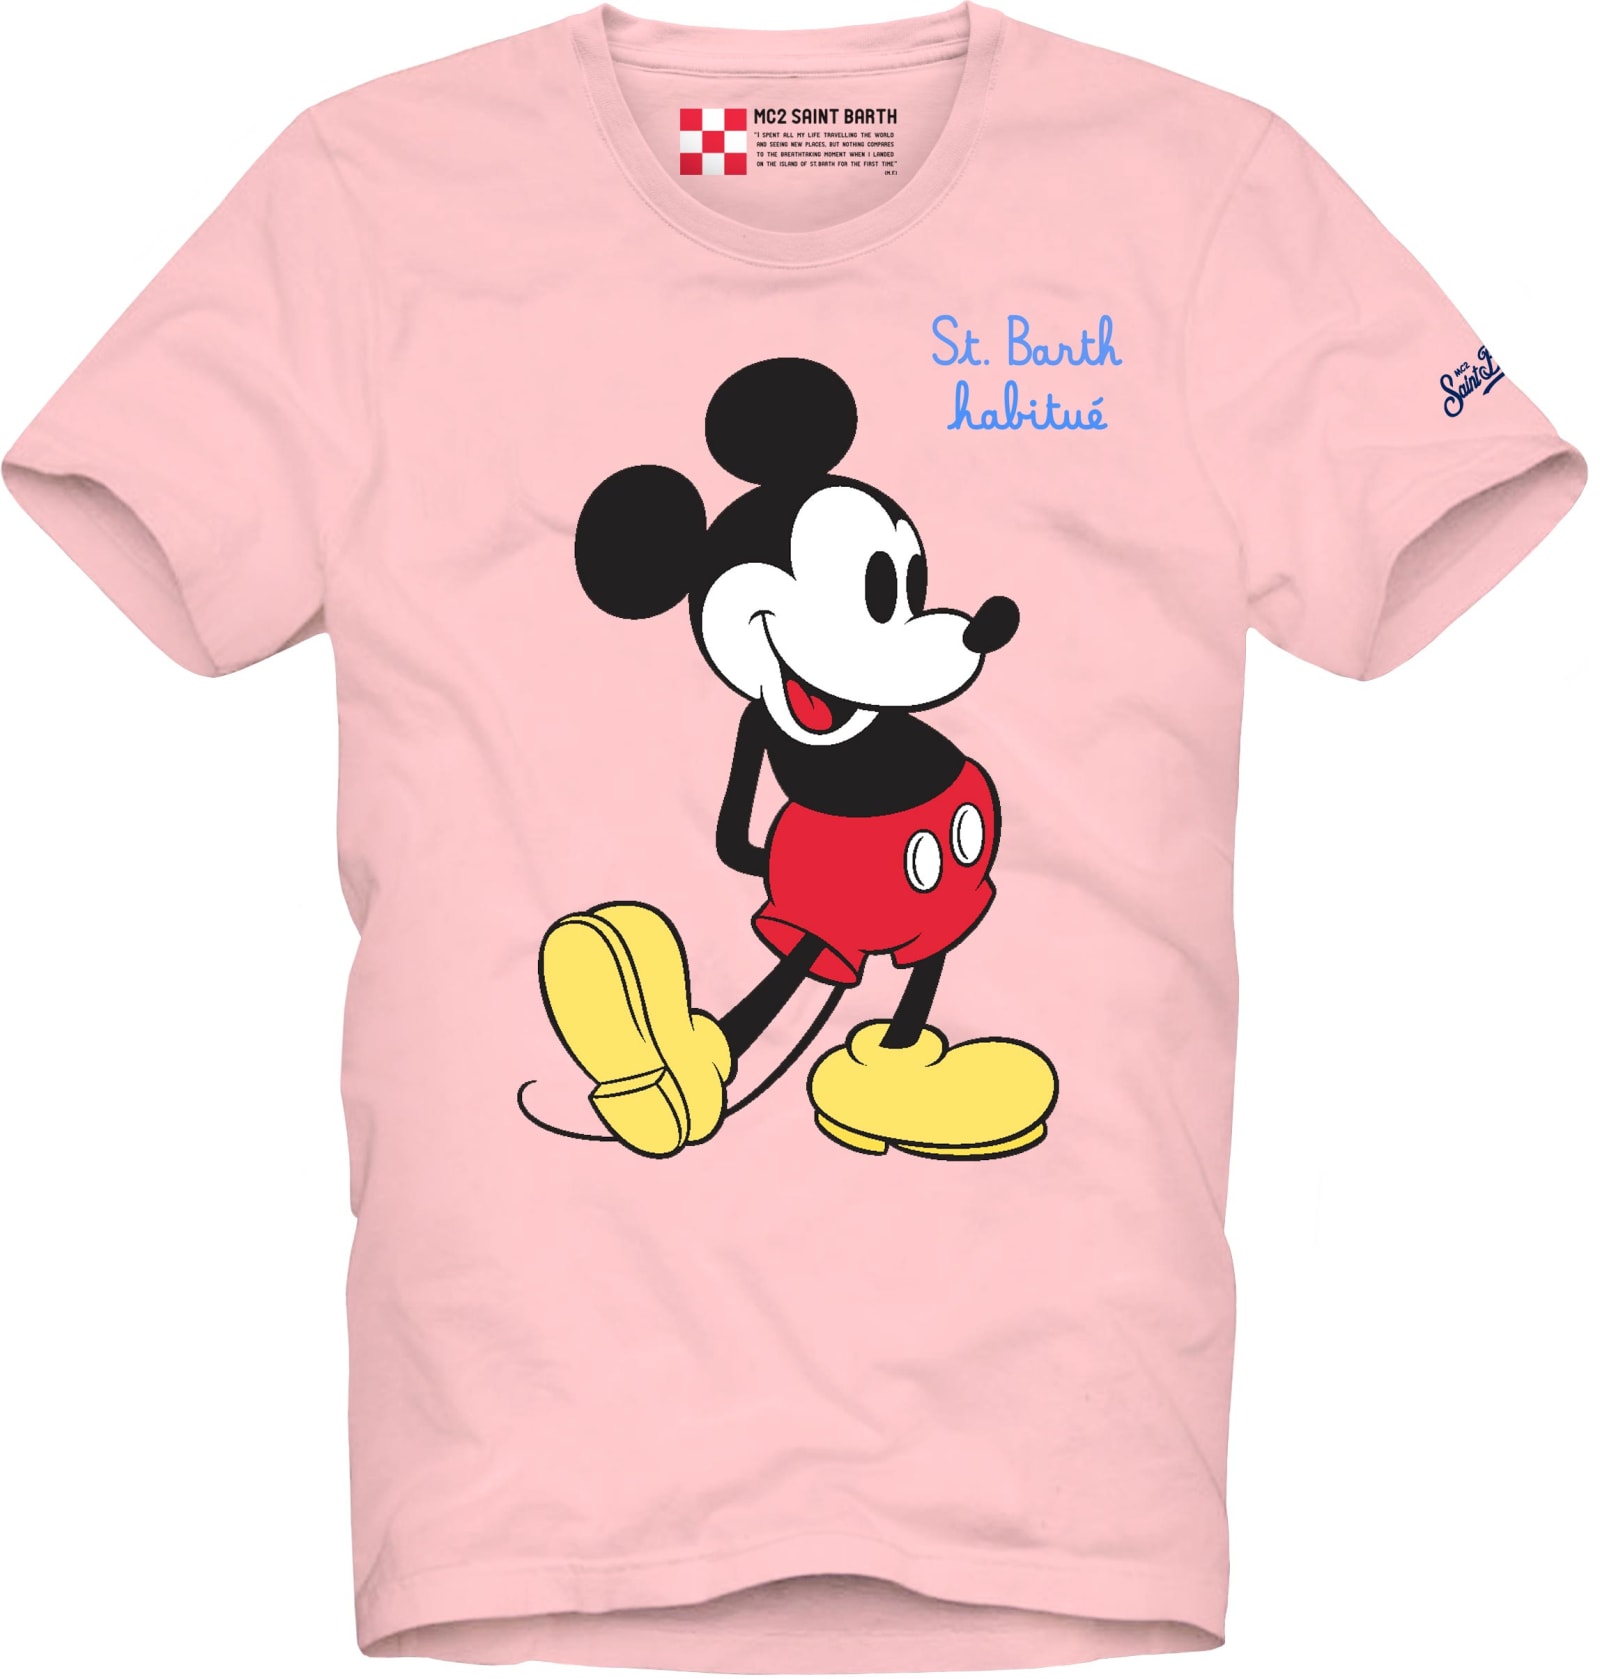 MC2 Saint Barth Where Is St. Barth Mickey Mouse Printed Pink T-shirt - Disney Special Edition ©